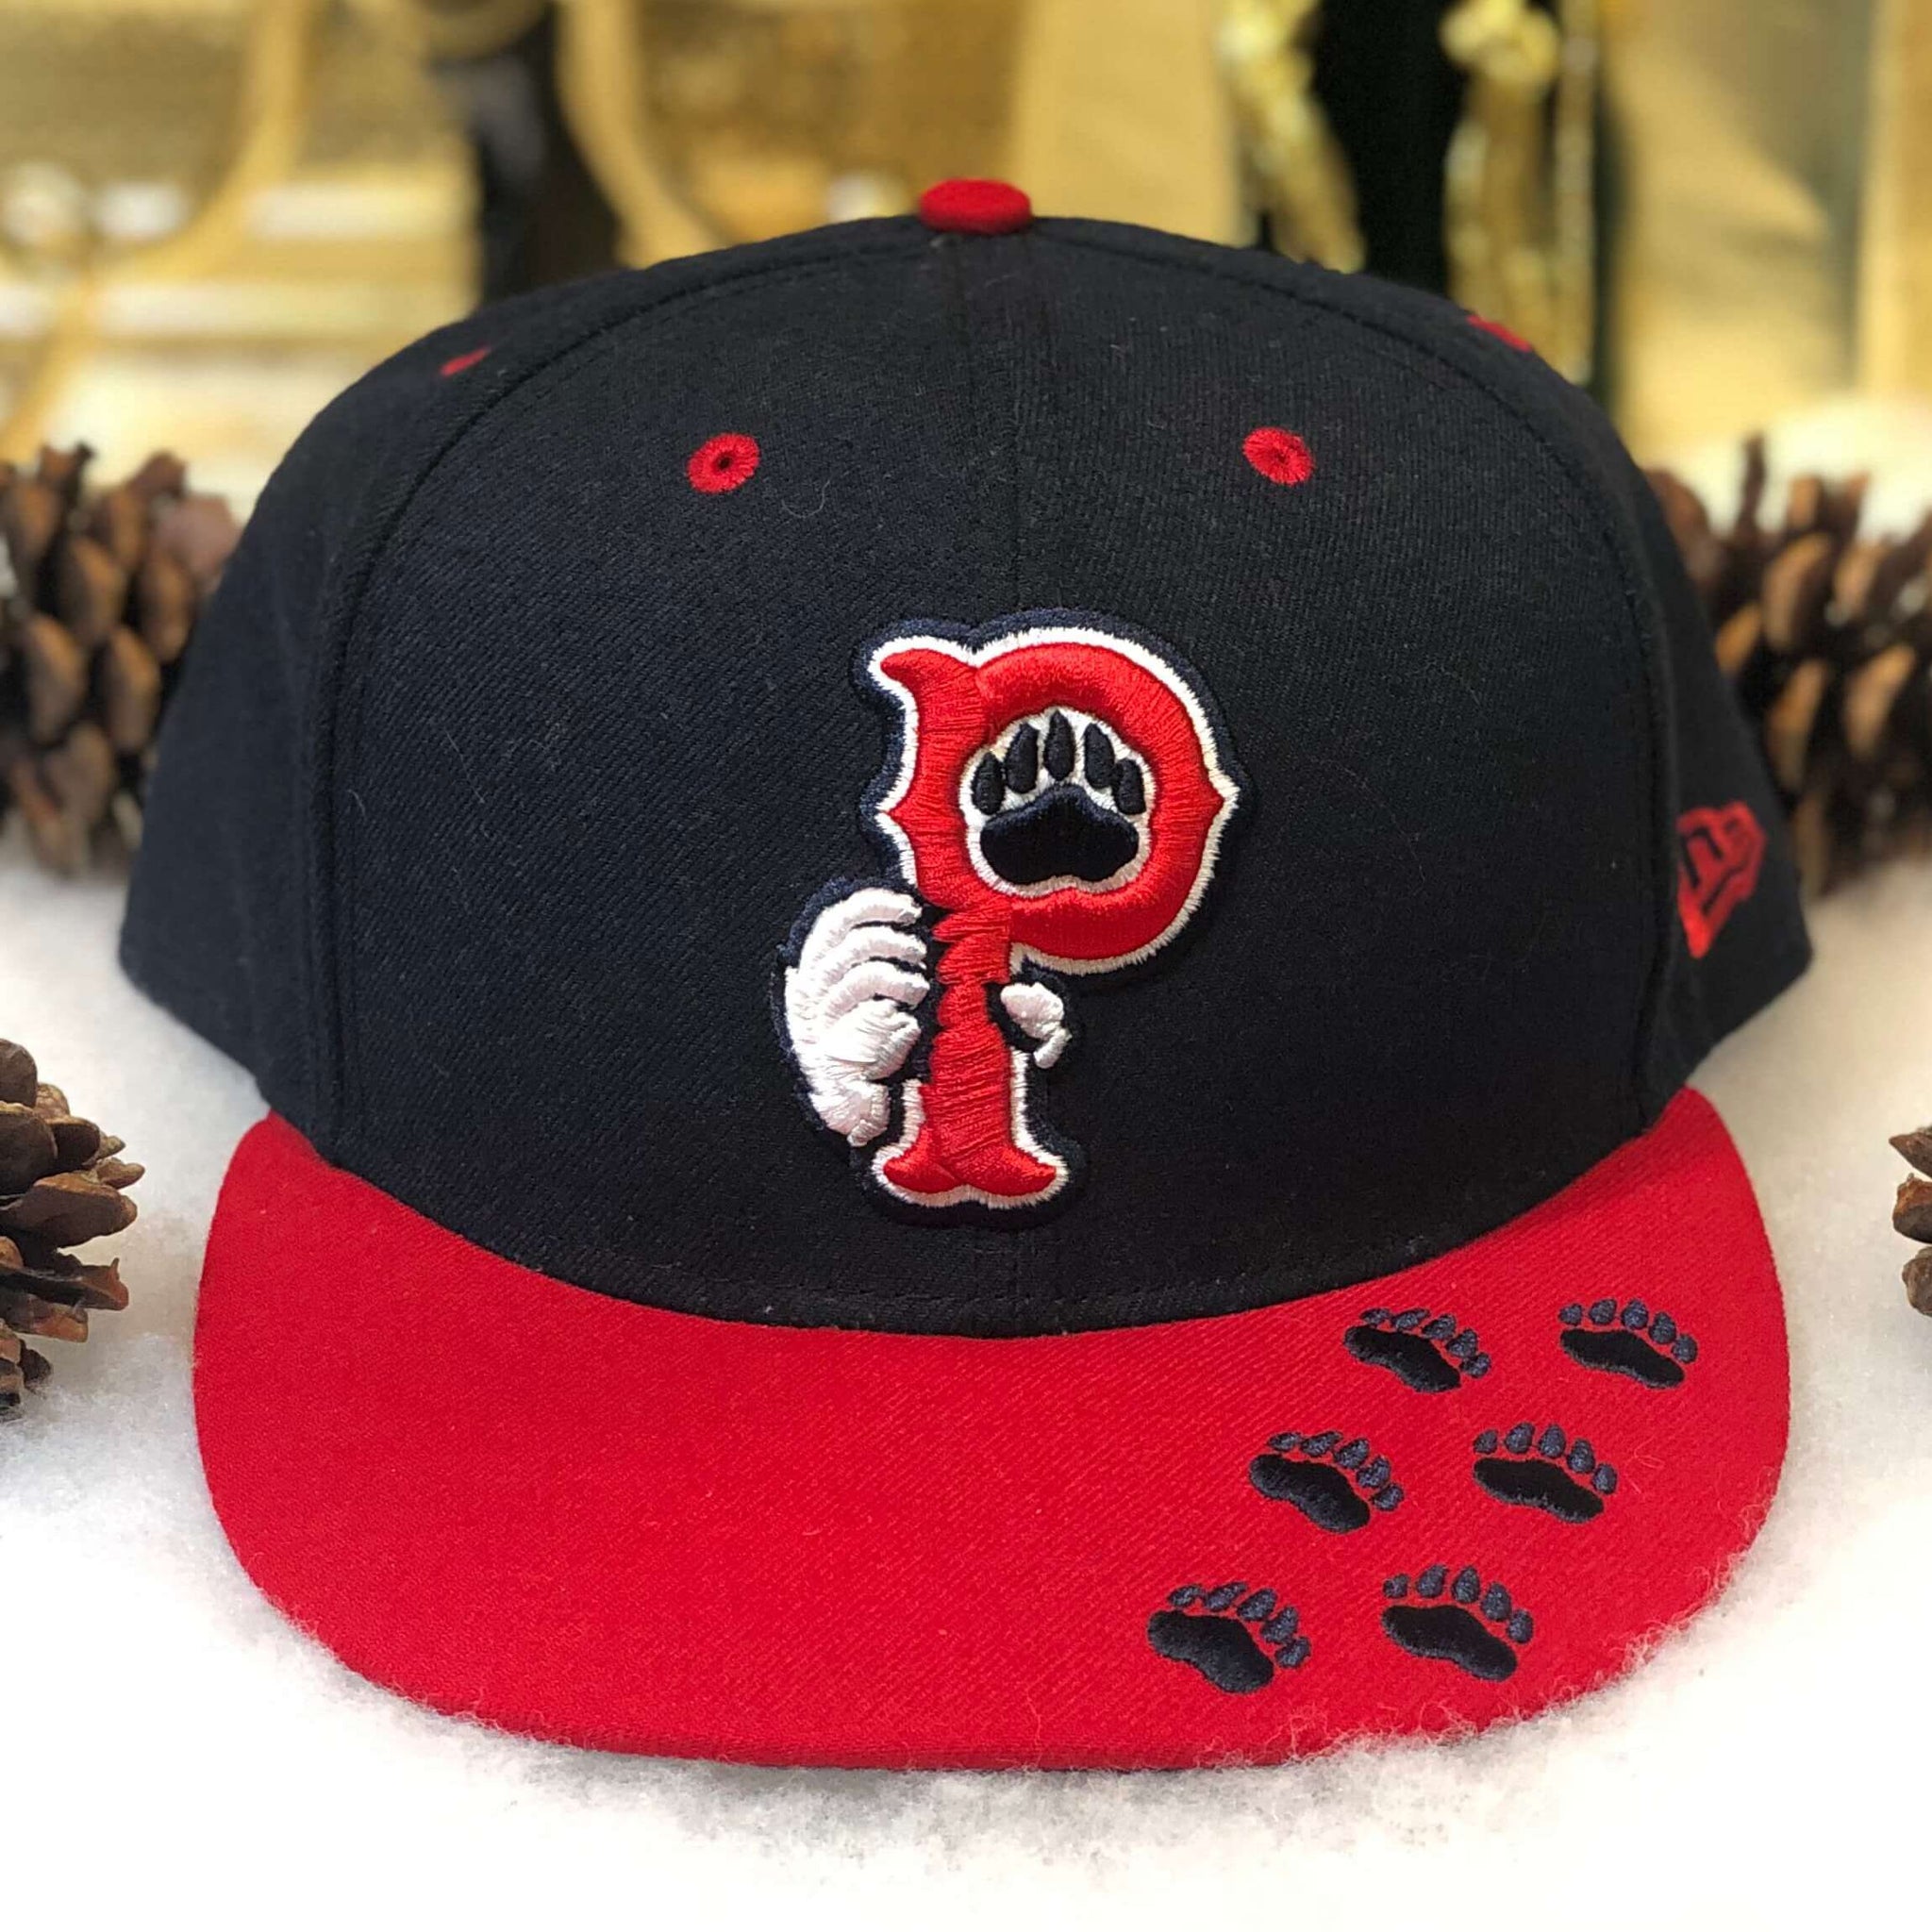 MiLB Pawtucket Red Sox "Paw Sox" New Era Fitted 7 3/4